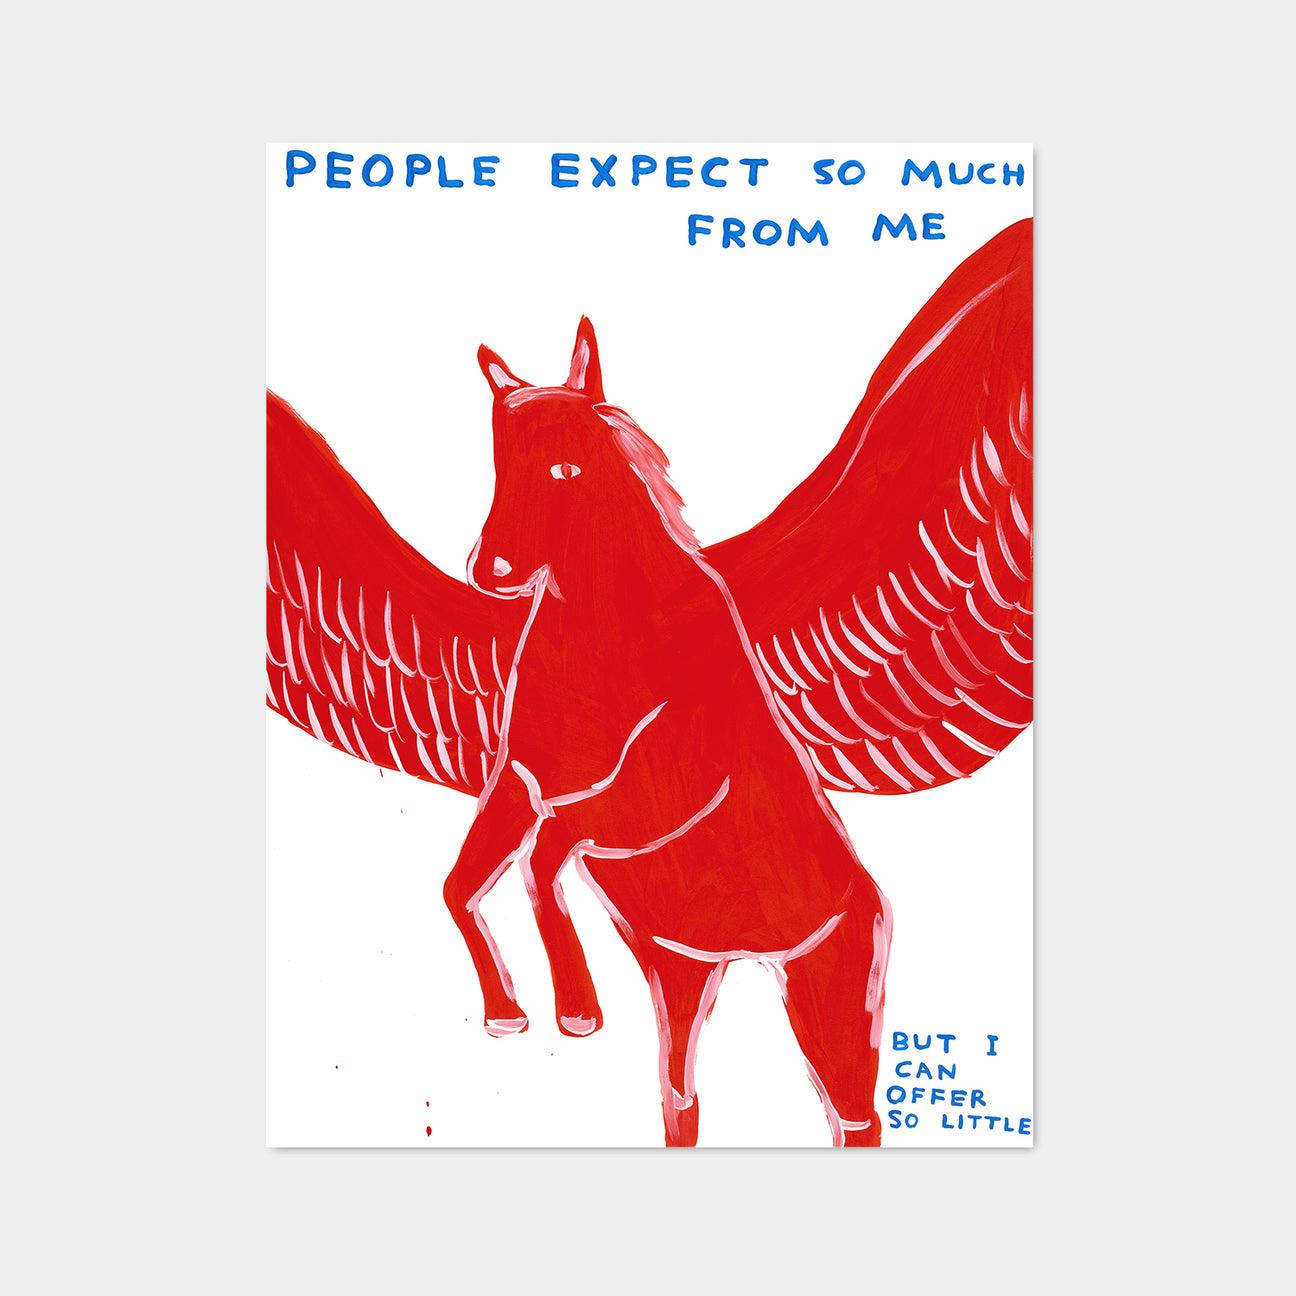 David Shrigley, People Expect So Much From Me, 2021

Off-set lithograph
Open edition, unframed 
60 x 80 cm (23.62 x 31.5 inches) 
Printed on 200g Munken Lynx paper by Narayana Press in Denmark 

This print is based on the original acrylic on paper